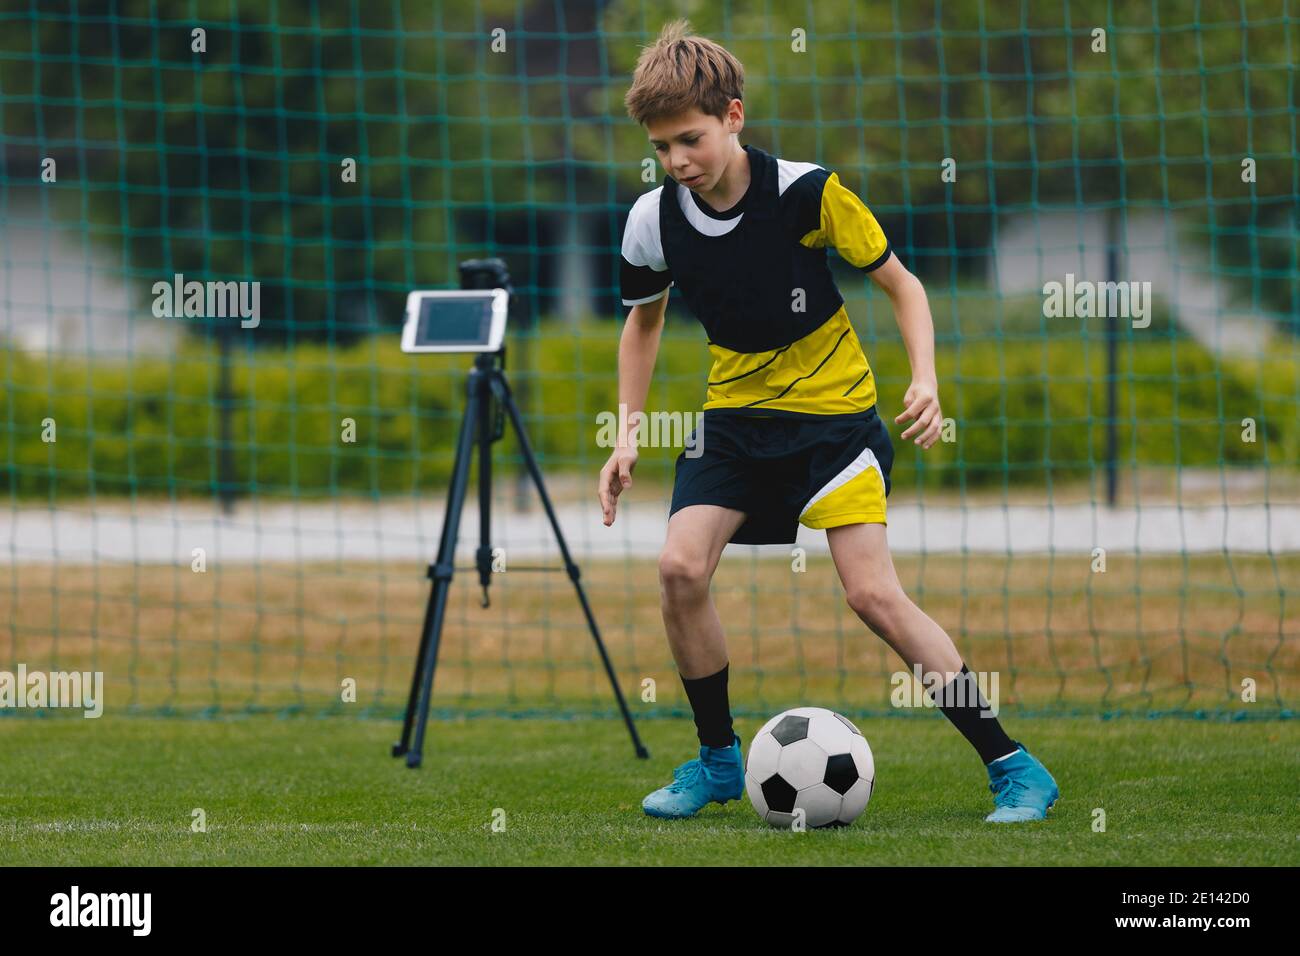 New technology on soccer training. Teenager running with football ball. Tablet on a stand in the background. Youth soccer team training unit Stock Photo